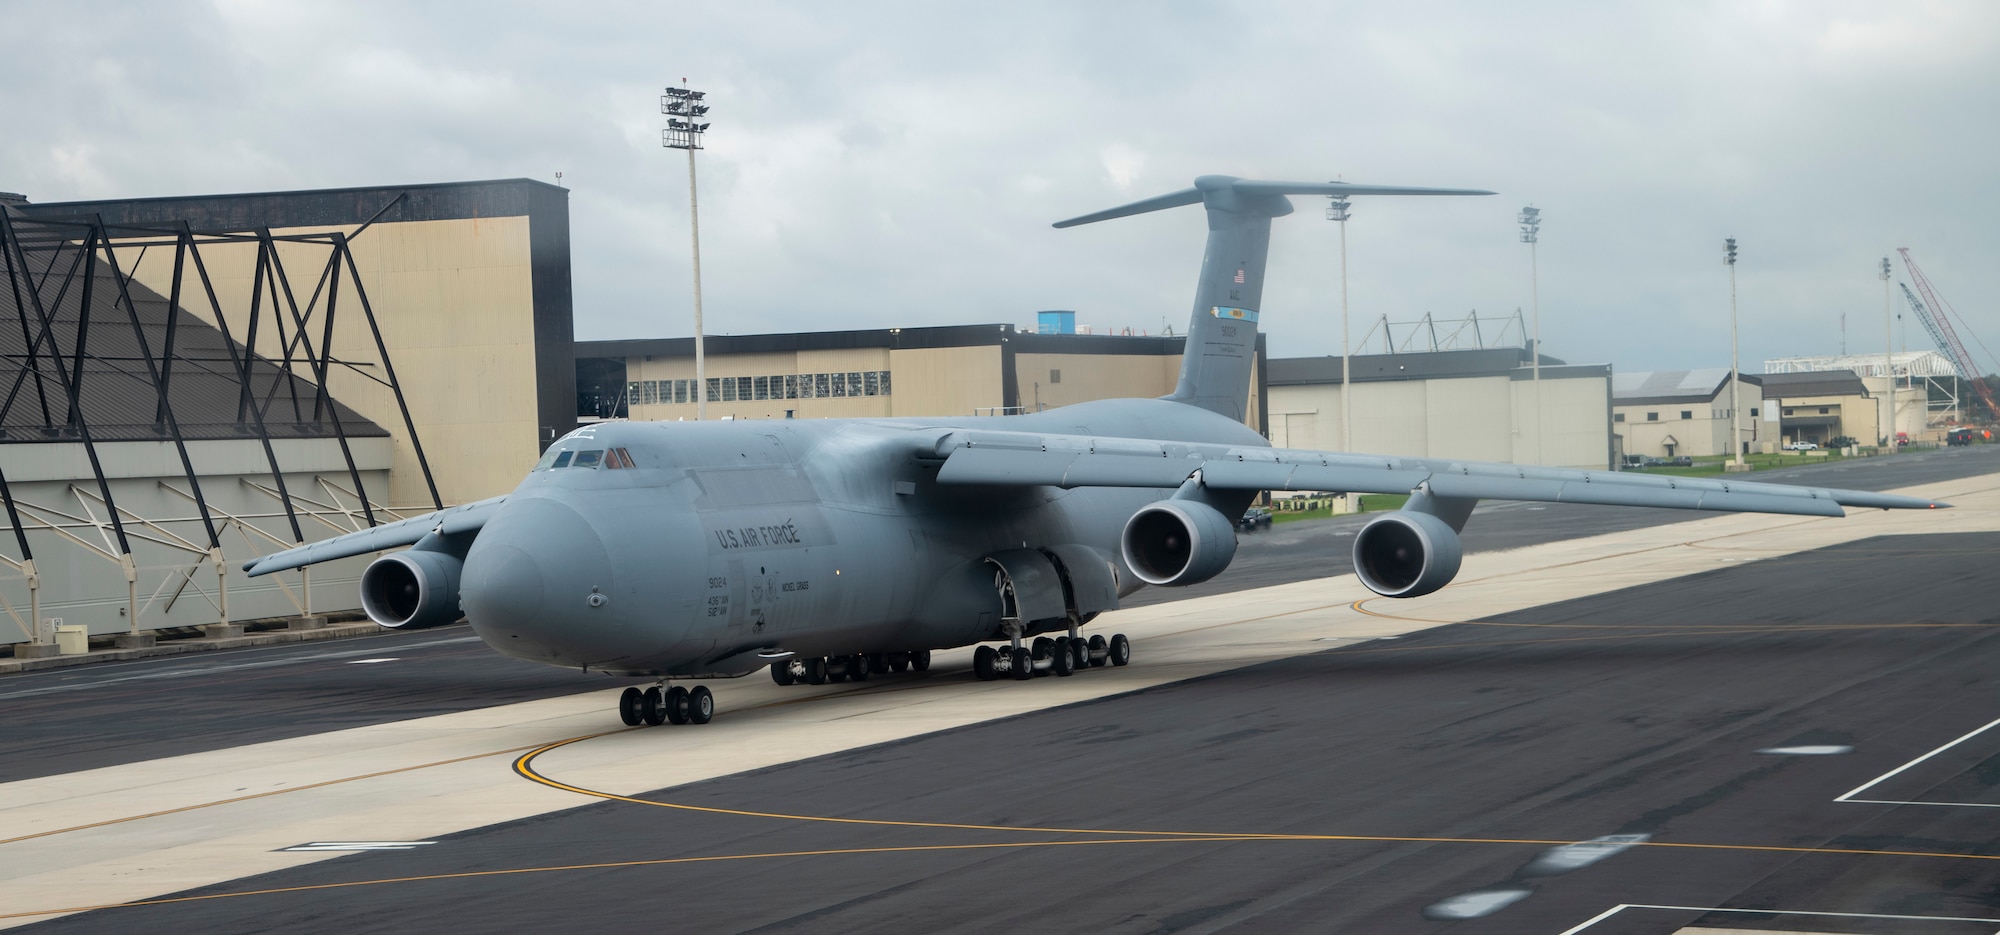 A C-5M Super Galaxy taxis at Dover Air Force Base, Delaware, Oct. 26, 2021. The C-5M Super Galaxy is a strategic transport aircraft and is the largest aircraft in the Air Force inventory. (U.S. Air Force photo by Tech. Sgt. Nicole Leidholm)